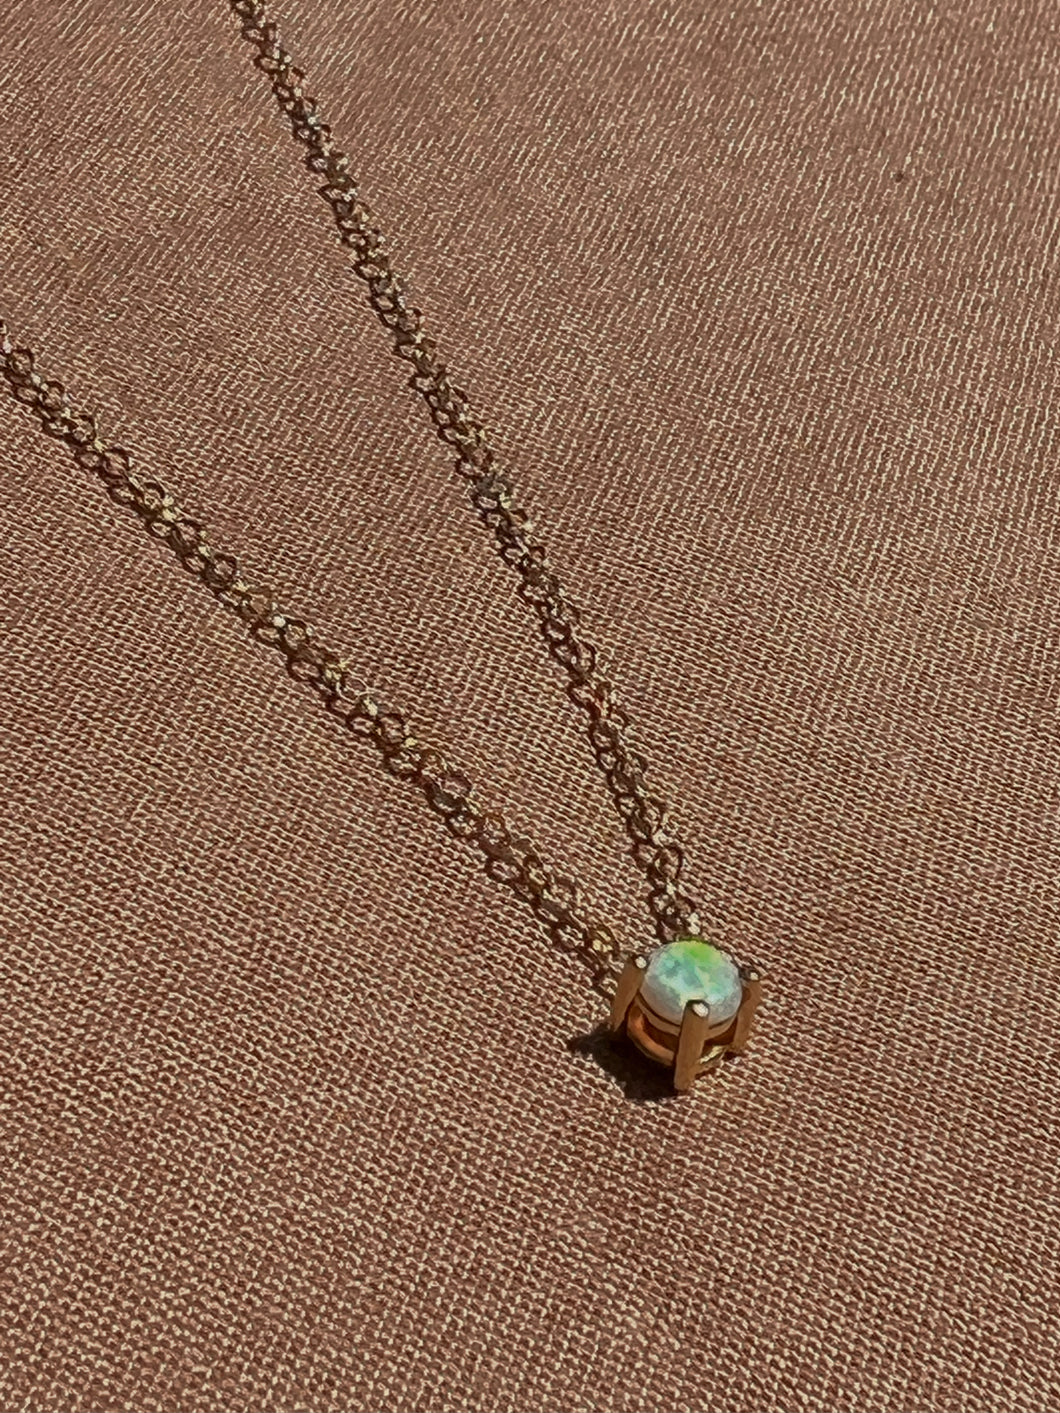 14k Yellow Gold White Opal Necklace